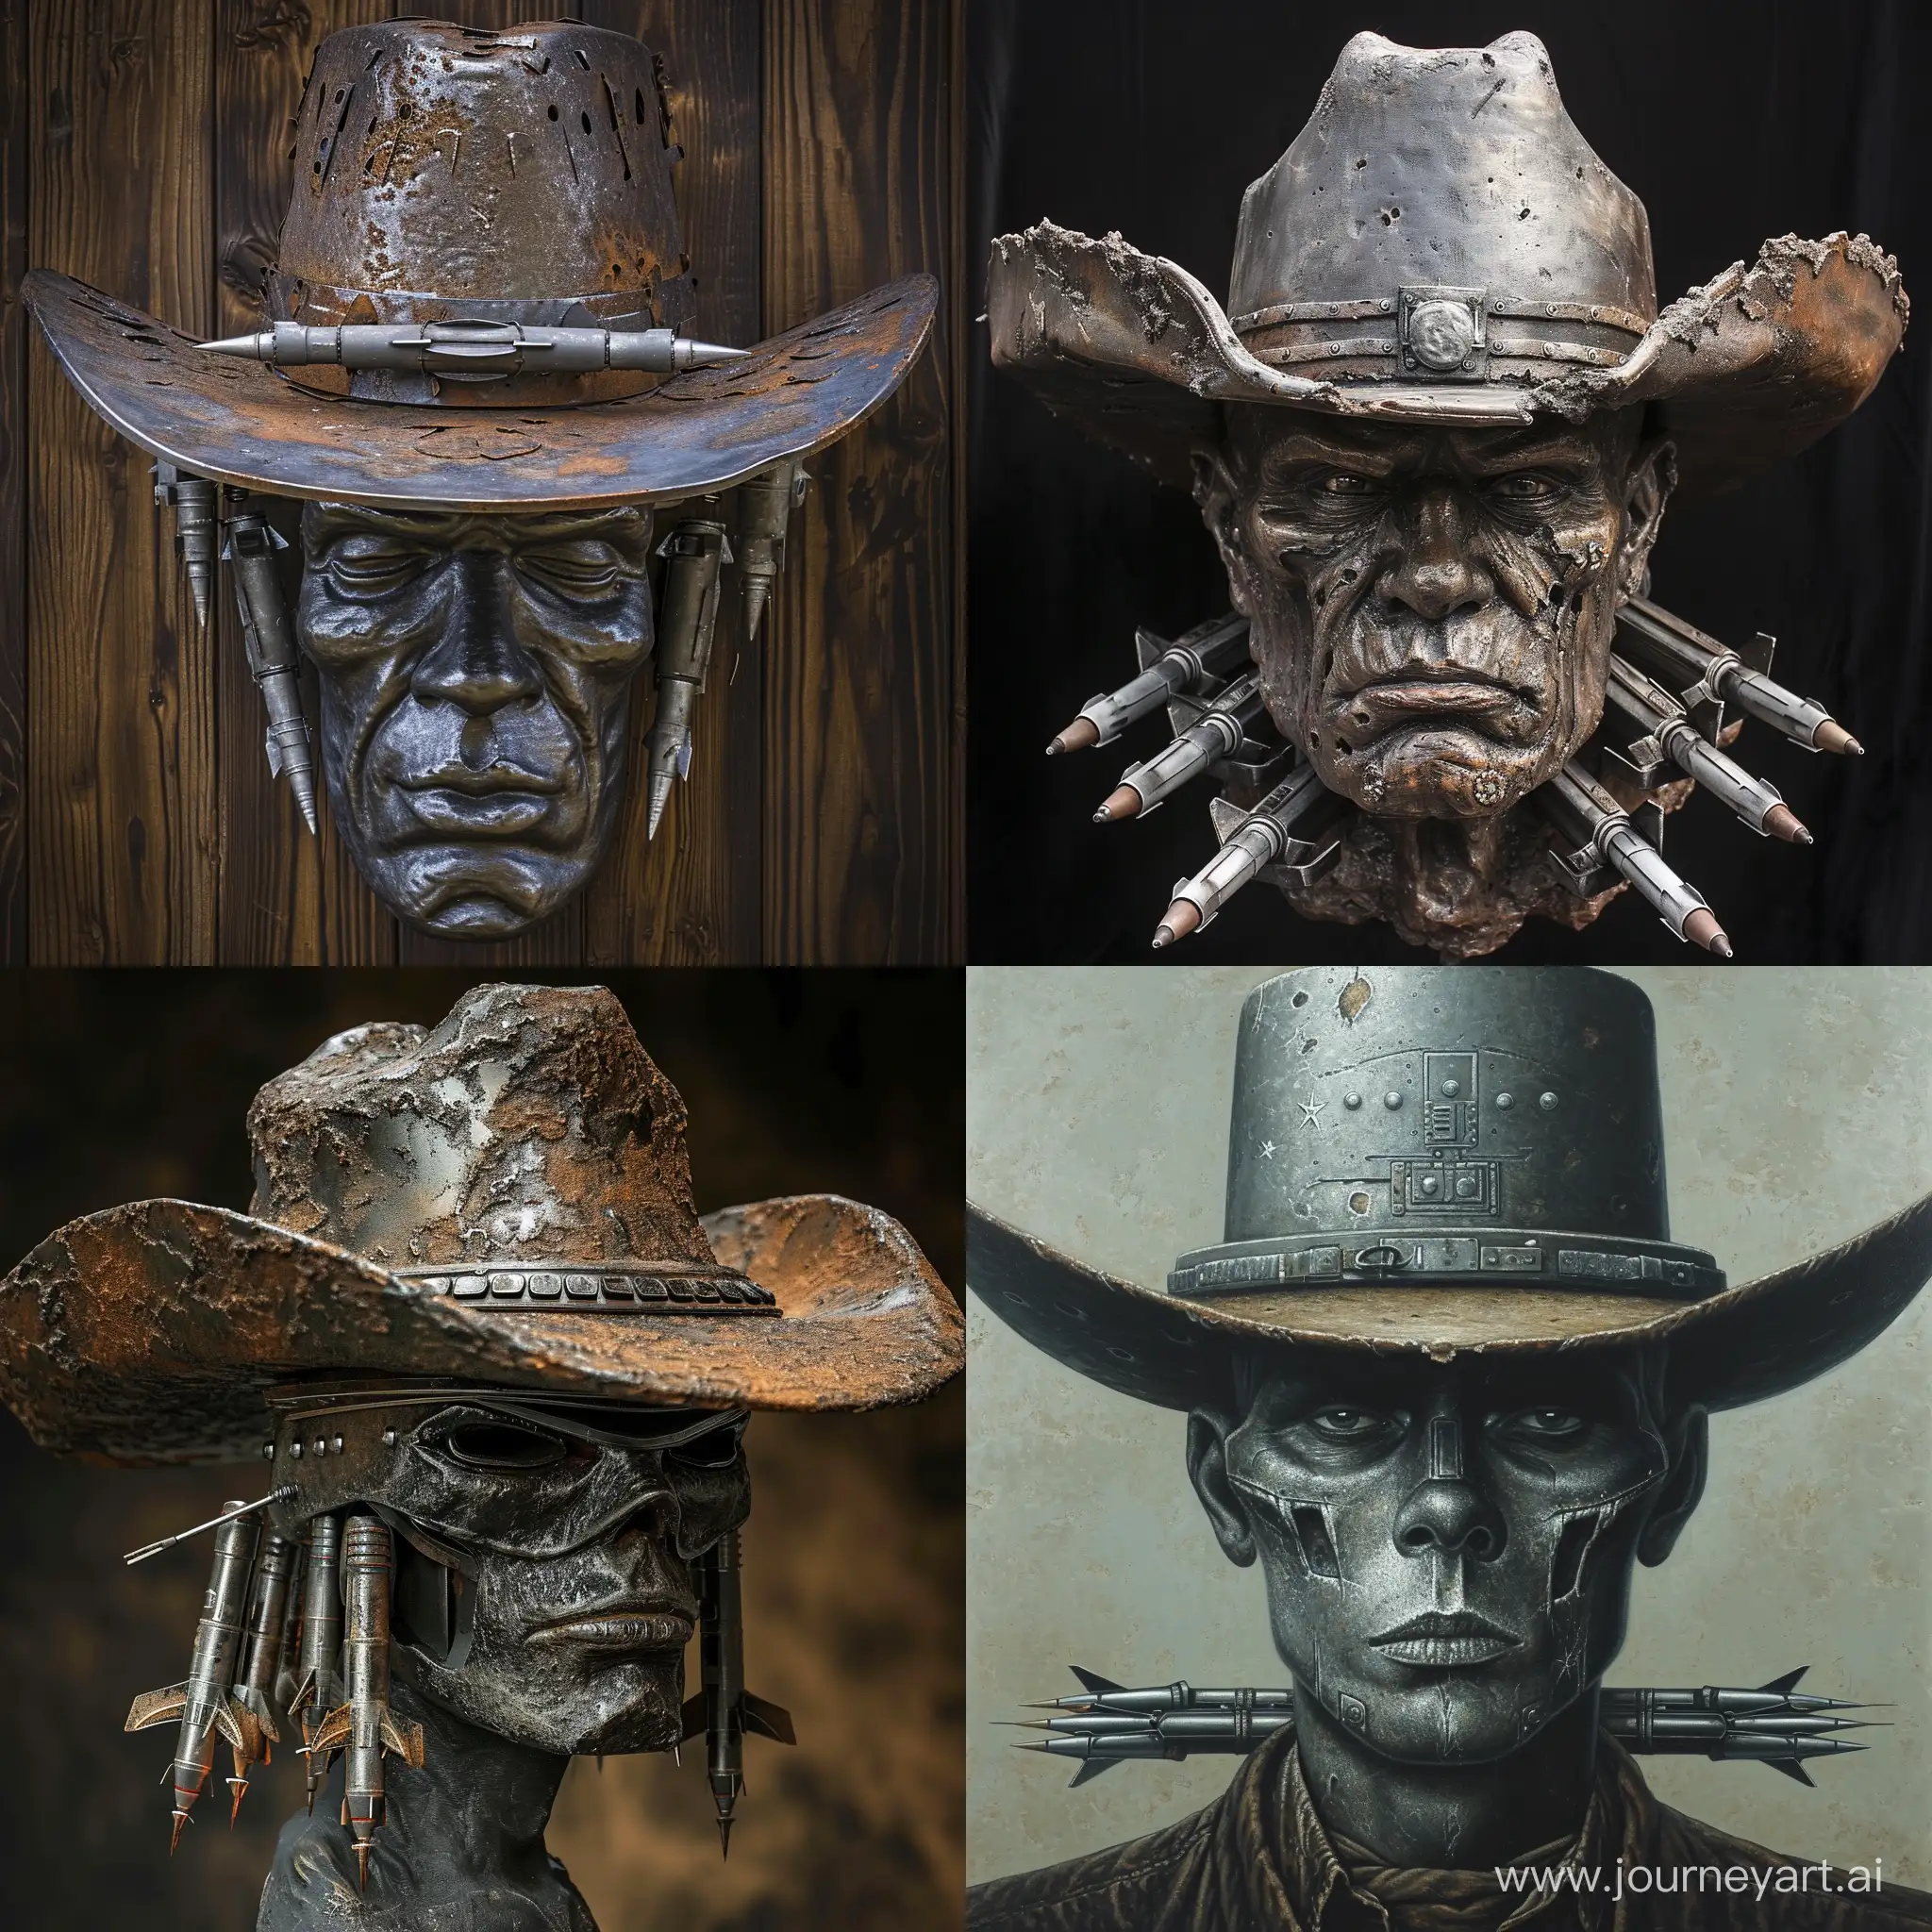 Weathered Cowboy Face with a steel cowboy hat with missles and rockets mounted under the rim of the hat
